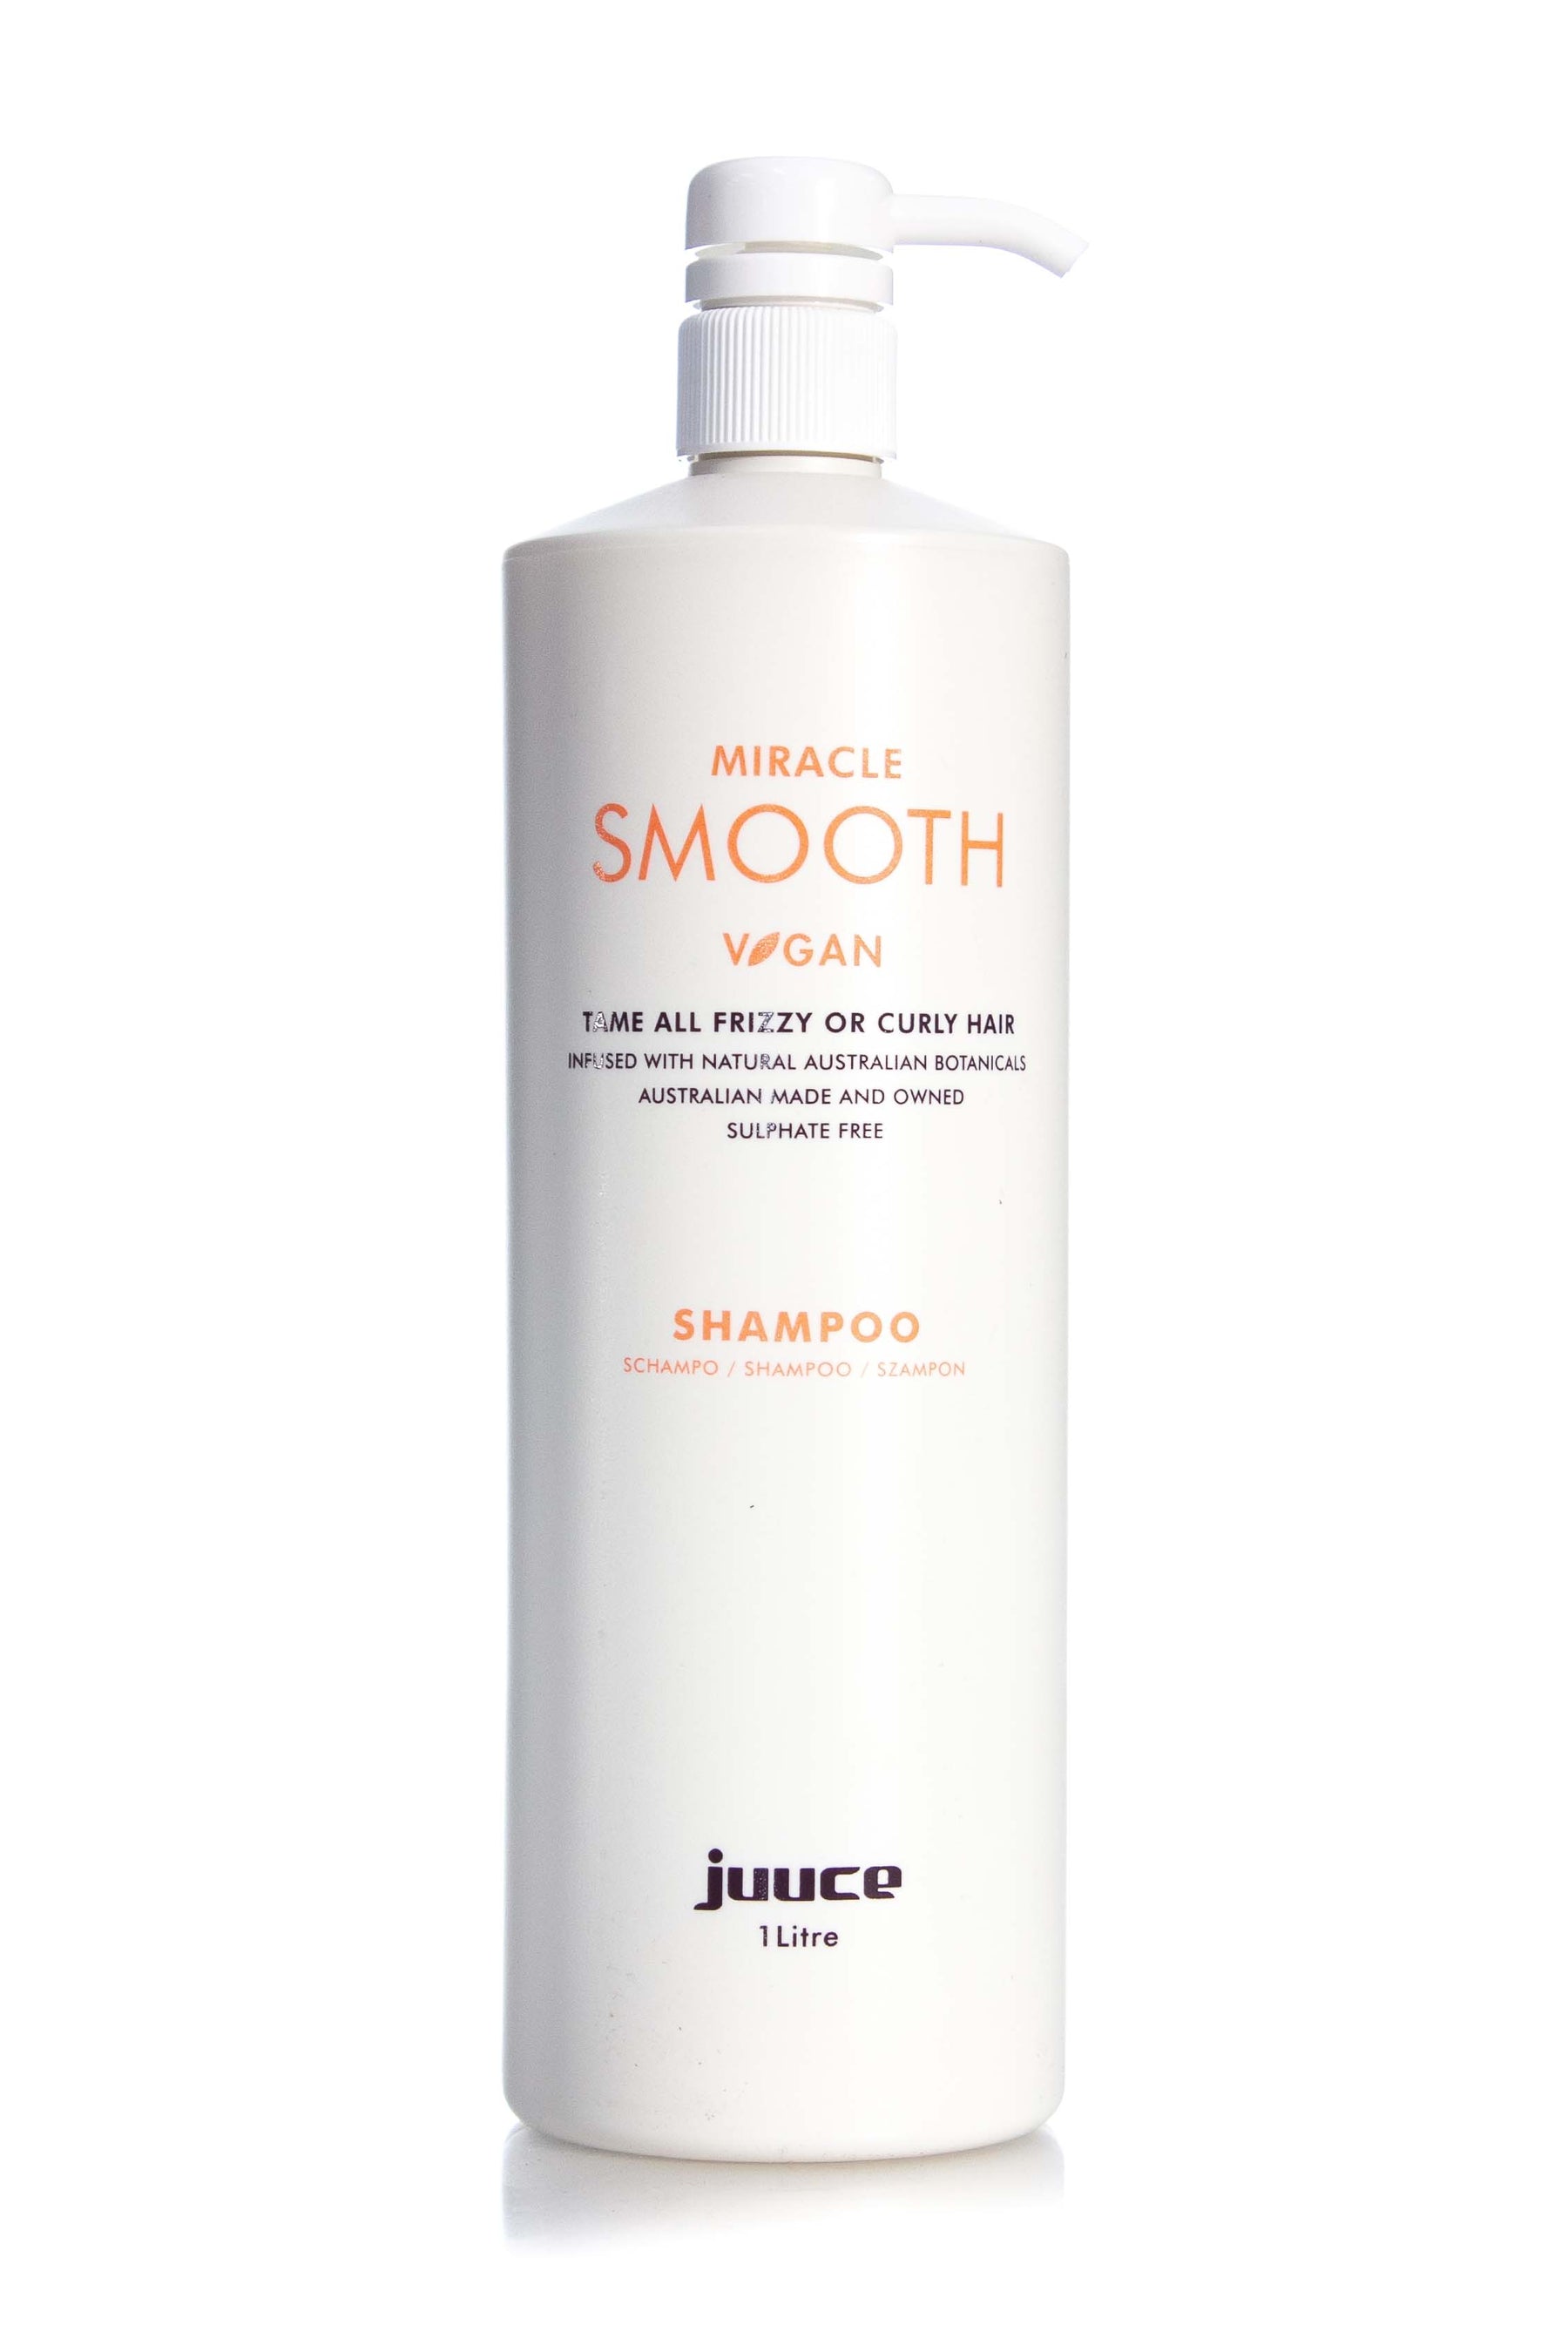 Juuce MIRACLE SMOOTH SHAMPOO 1LT (previously D'Frizz)